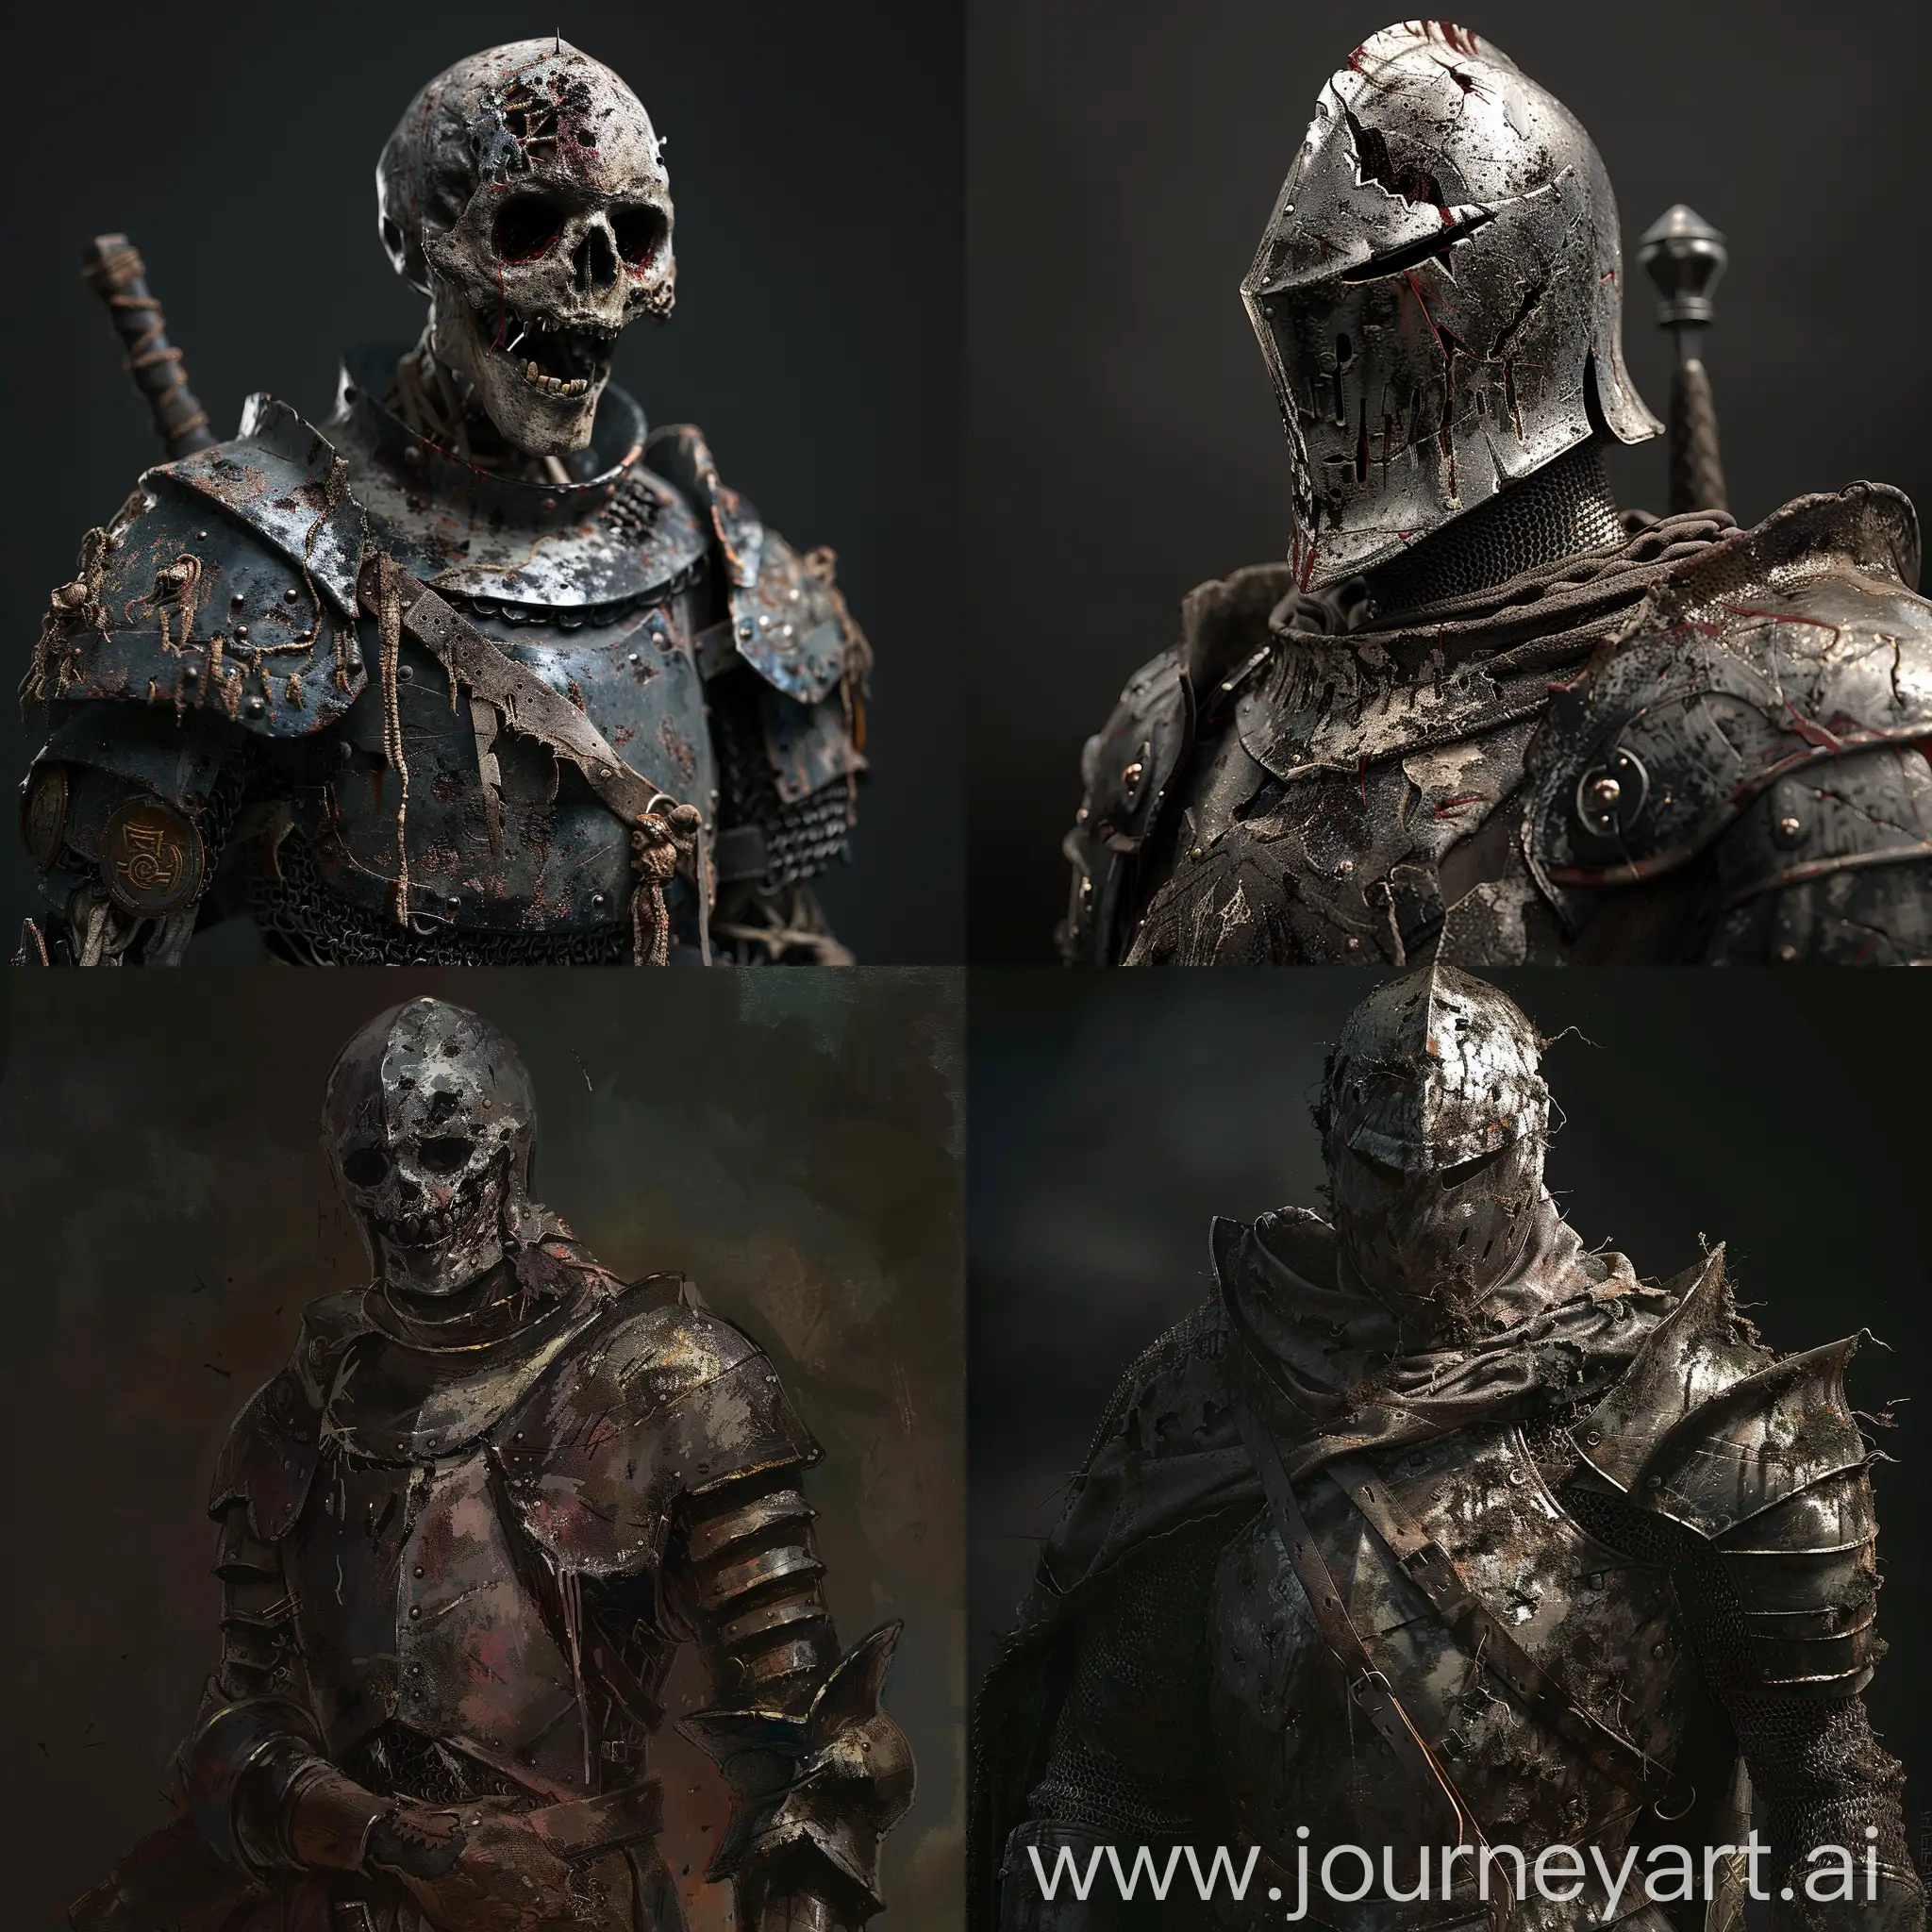 The undead knight is without a helmet, in dirty broken armor.